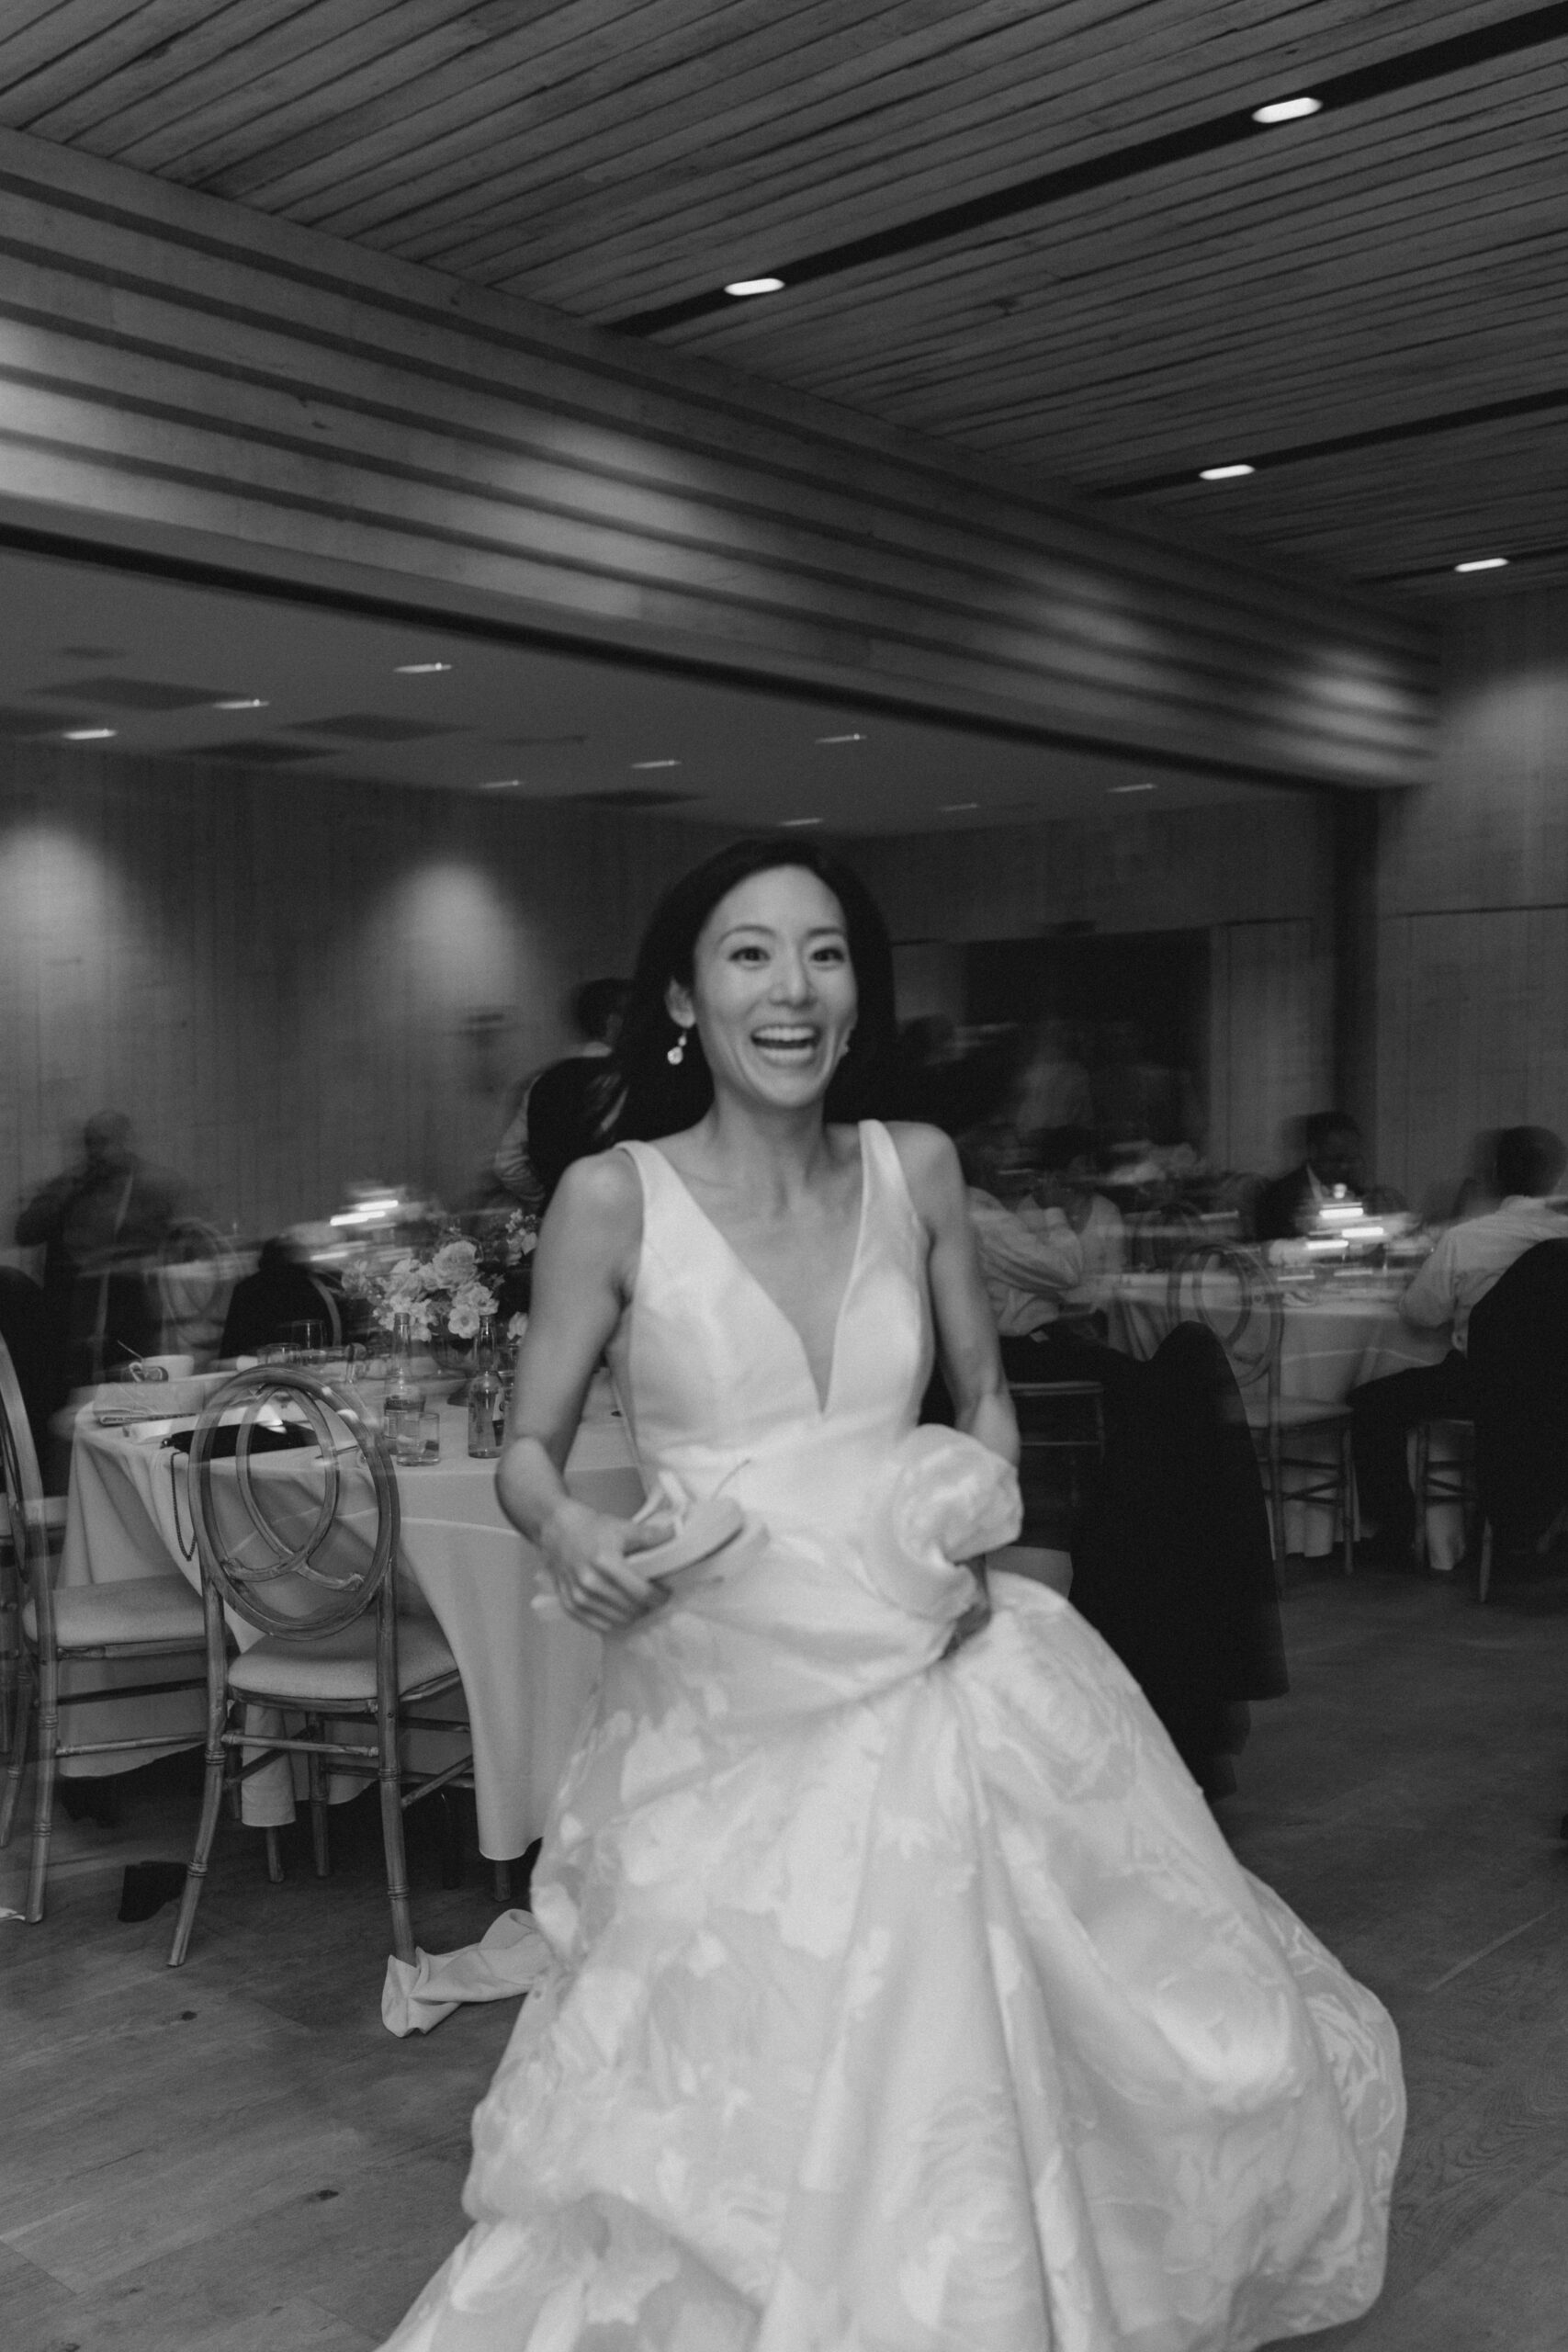 Blurry black and white photo of bride going to get flip flops for wedding reception. 